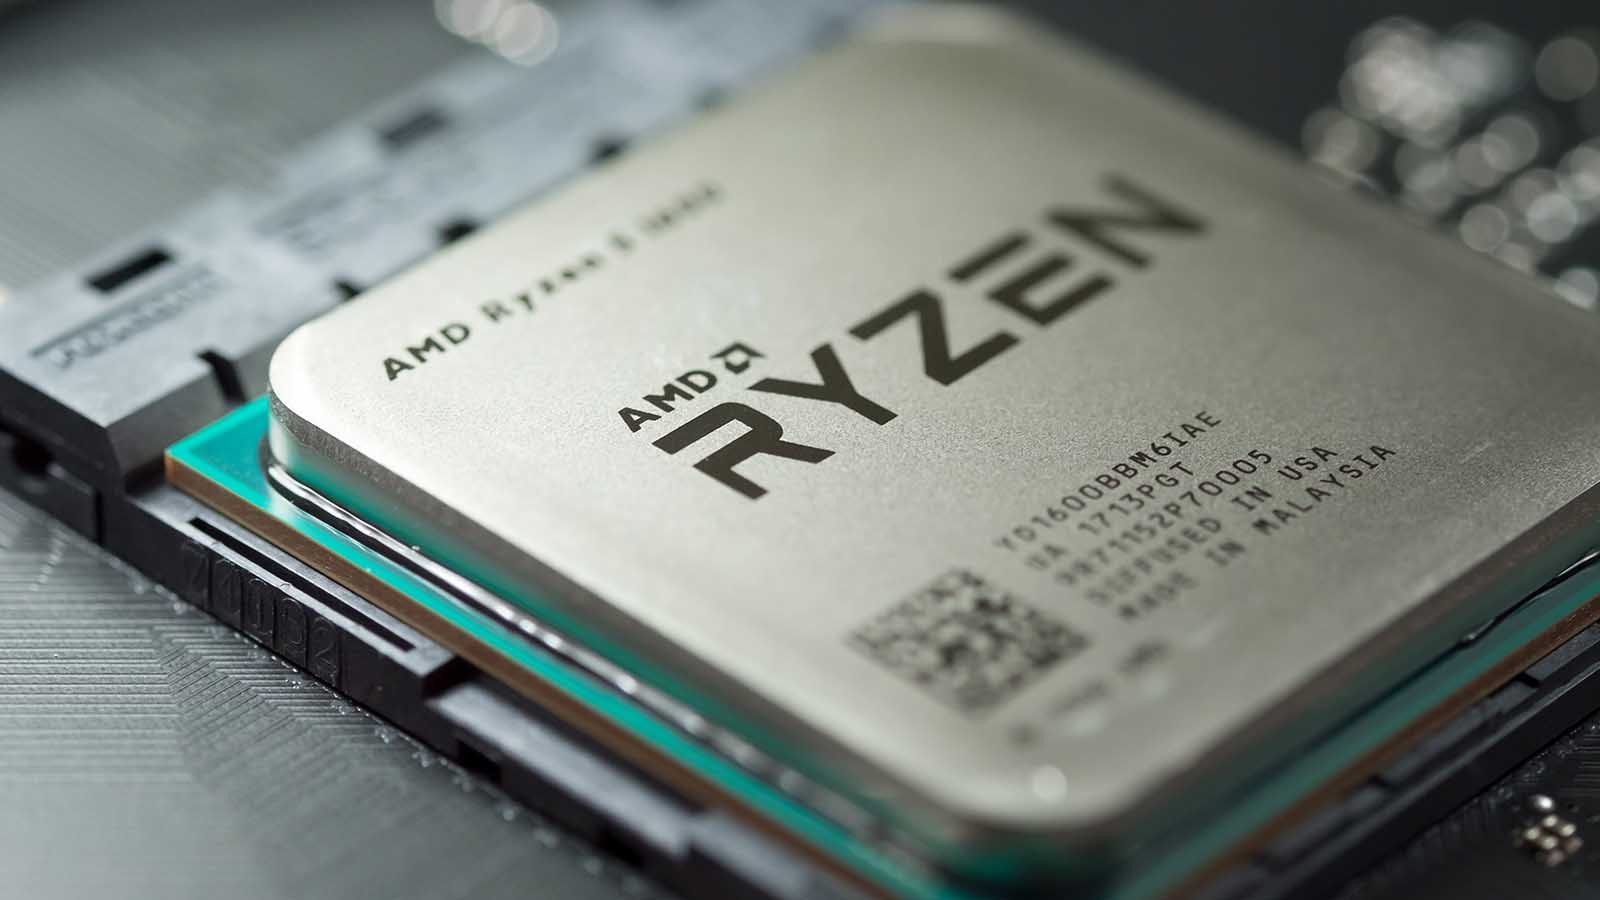 AMD Stock is Going From Strength to Strength but Beware of Its Valuation